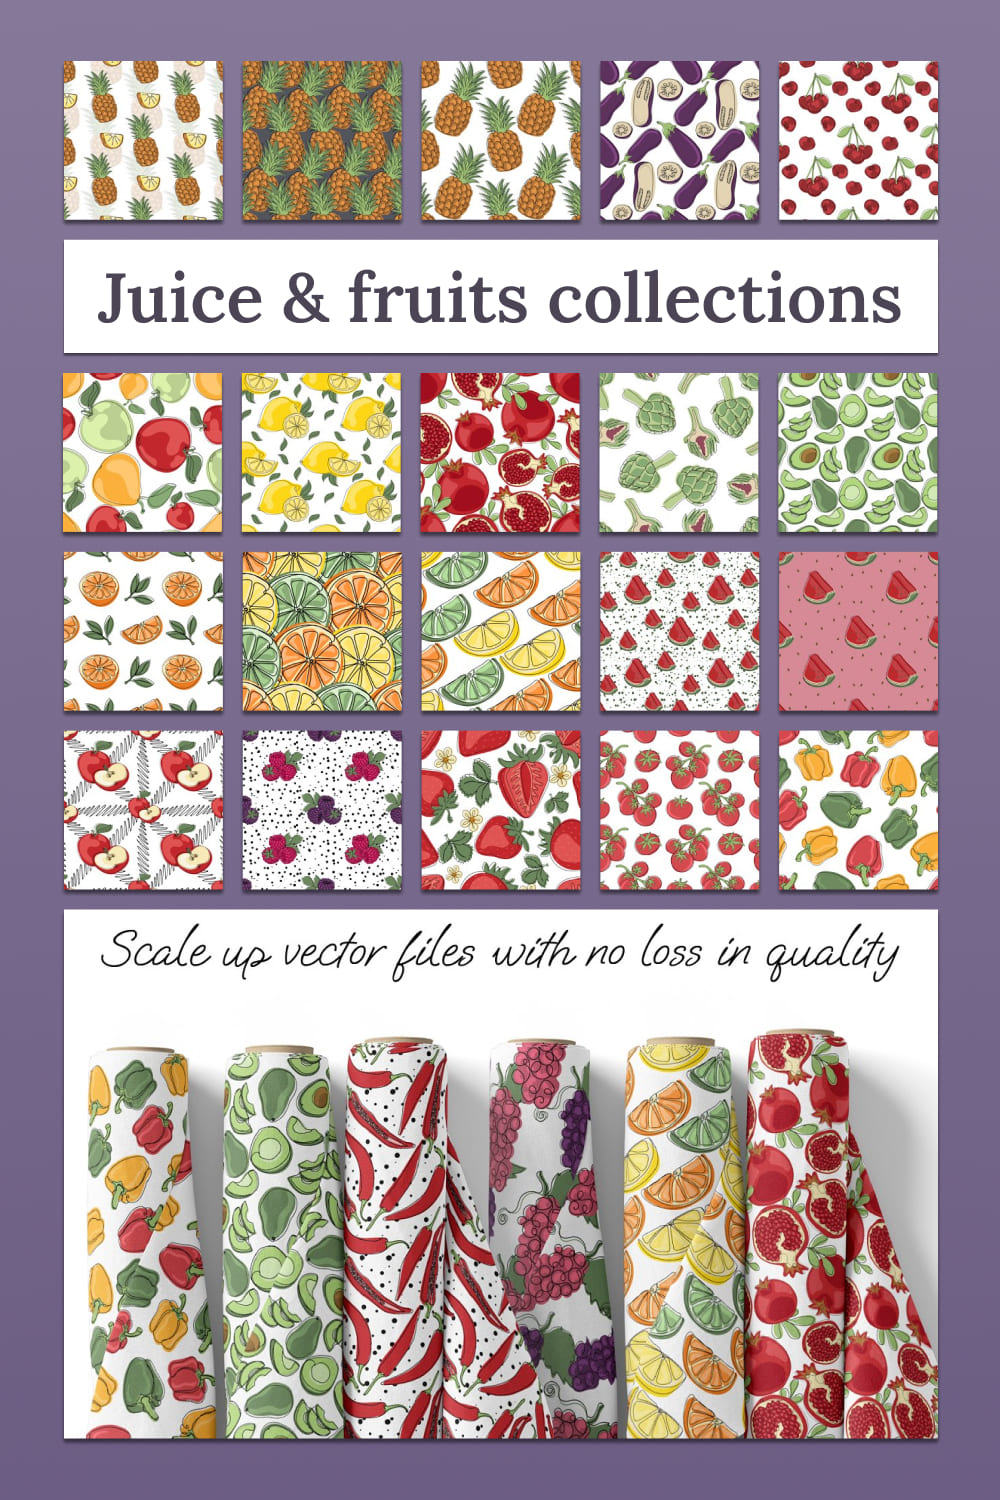 Juice fruits collections - pinterest image preview.